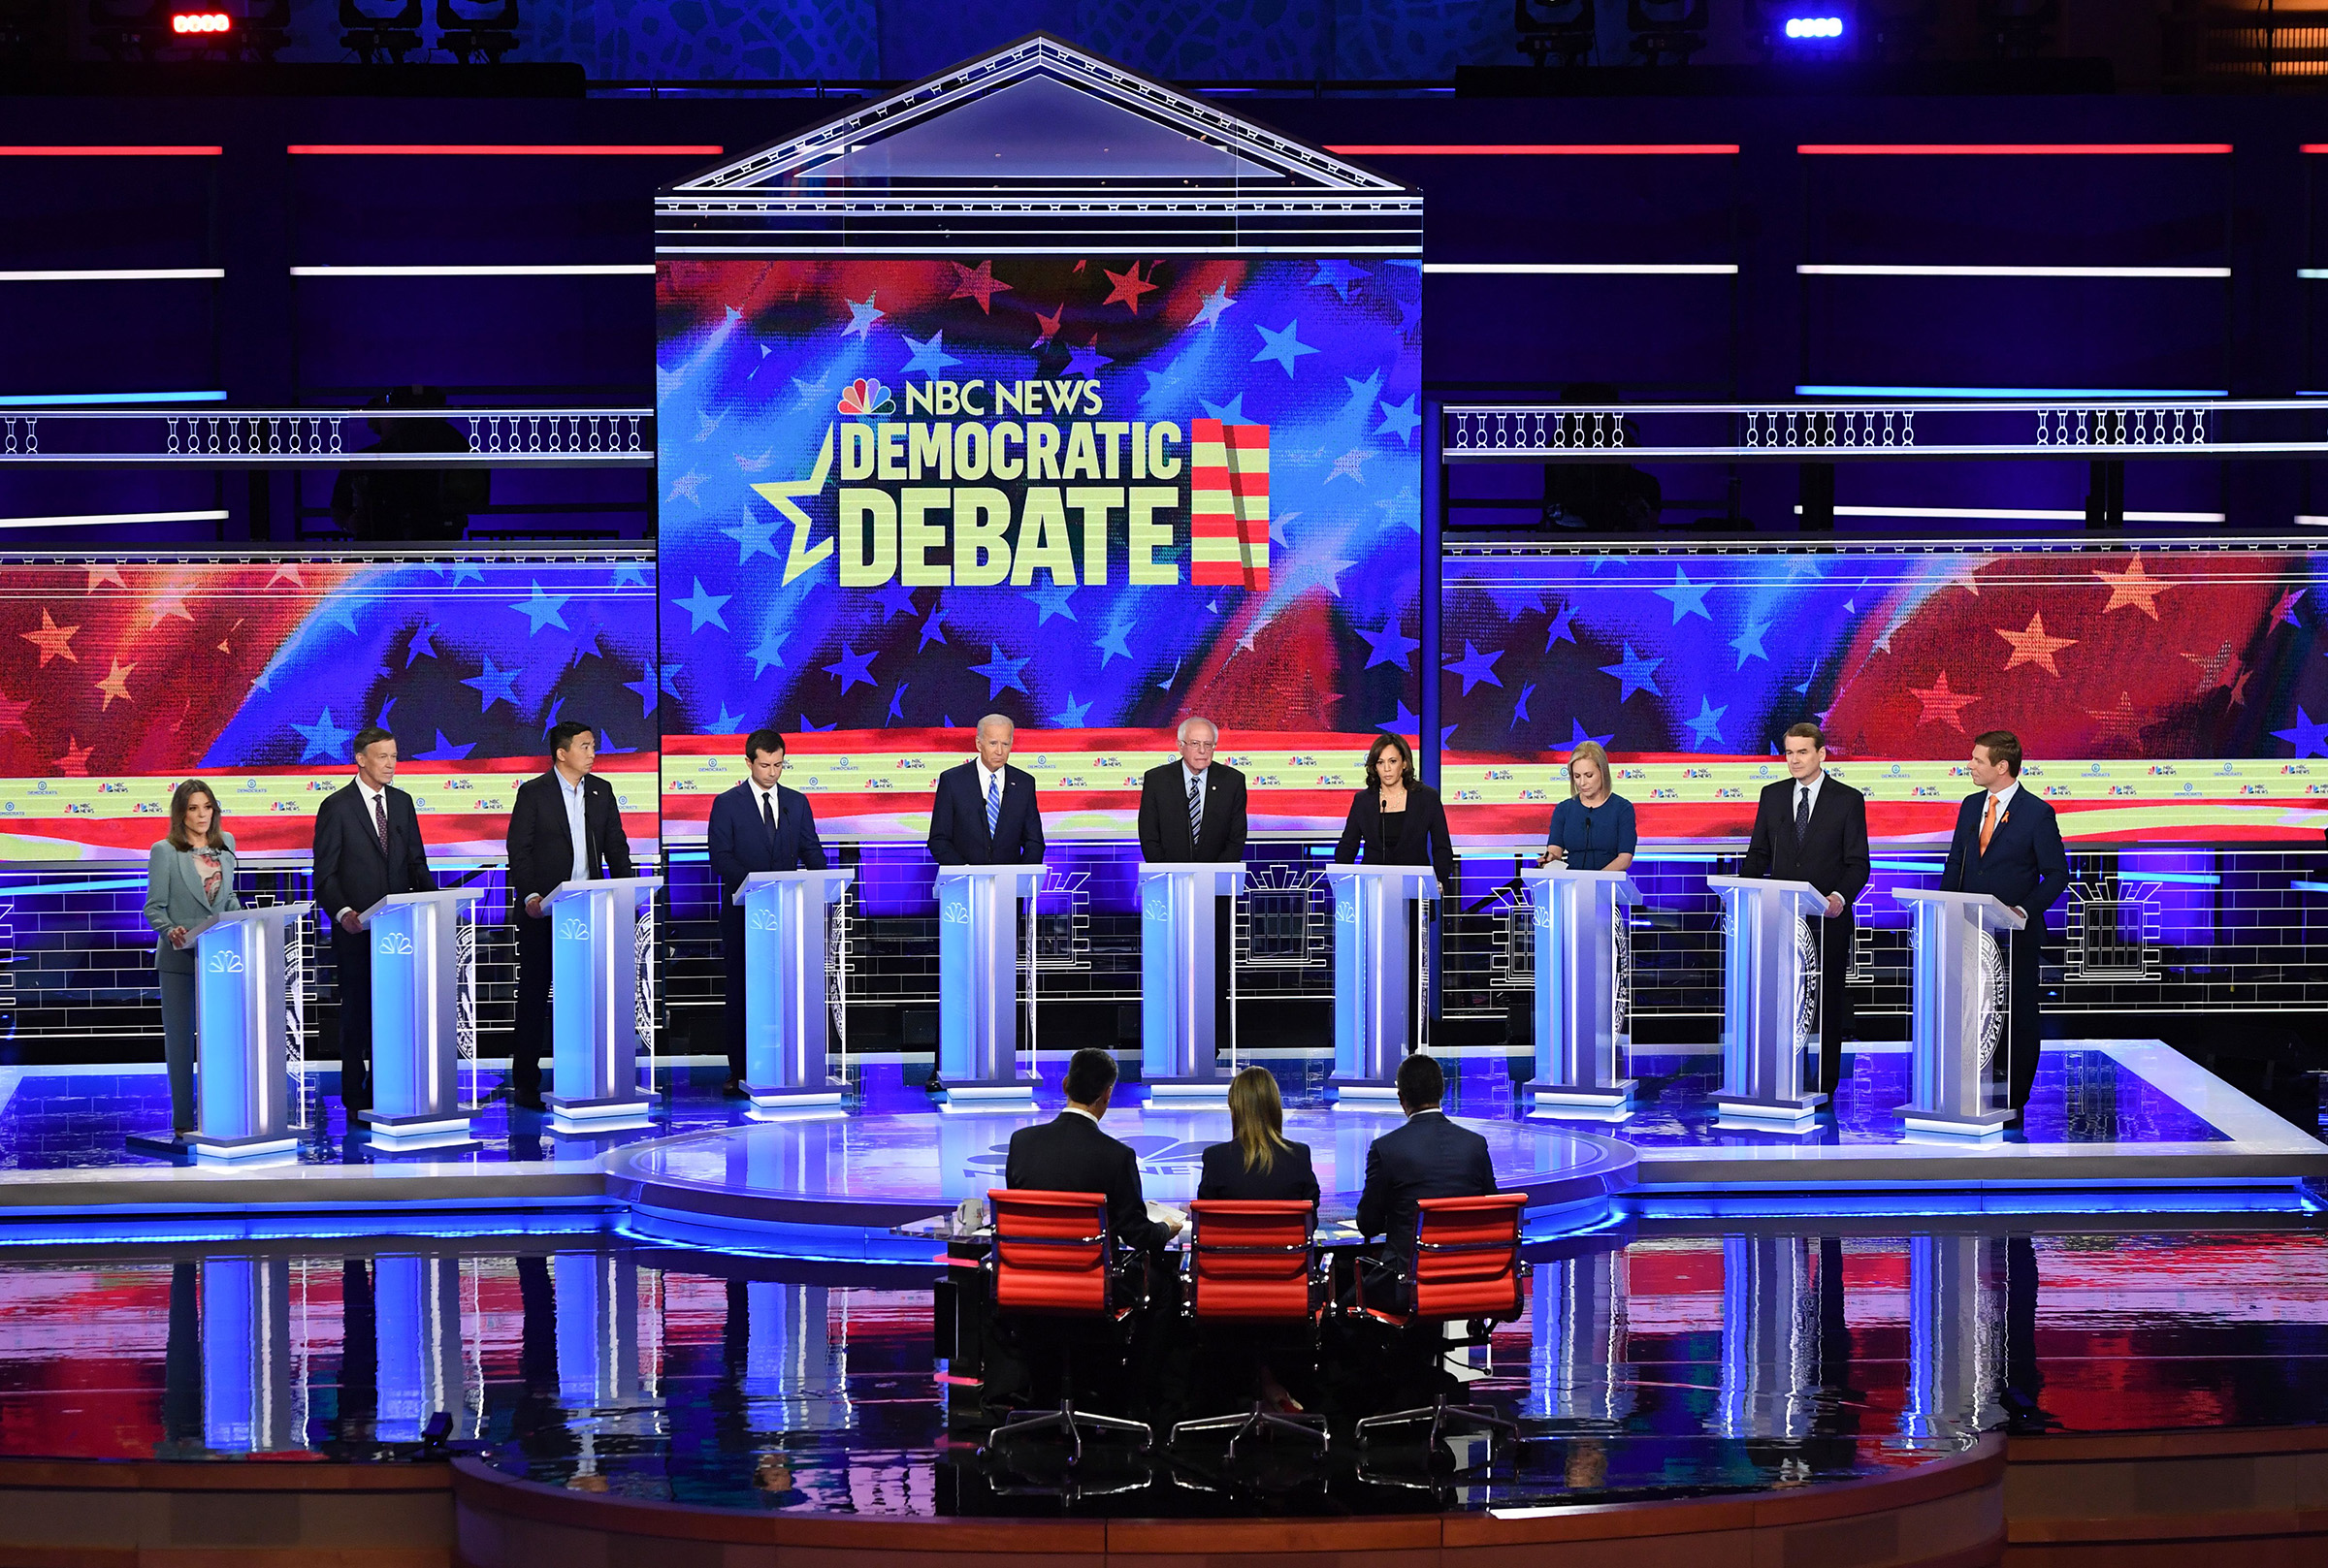 Democratic presidential hopefuls participate in the second Democratic primary debate of the 2020 presidential campaign season hosted by NBC News at the Adrienne Arsht Center for the Performing Arts in Miami, Florida, June 27, 2019. (Saul Loeb—AFP/Getty Images)